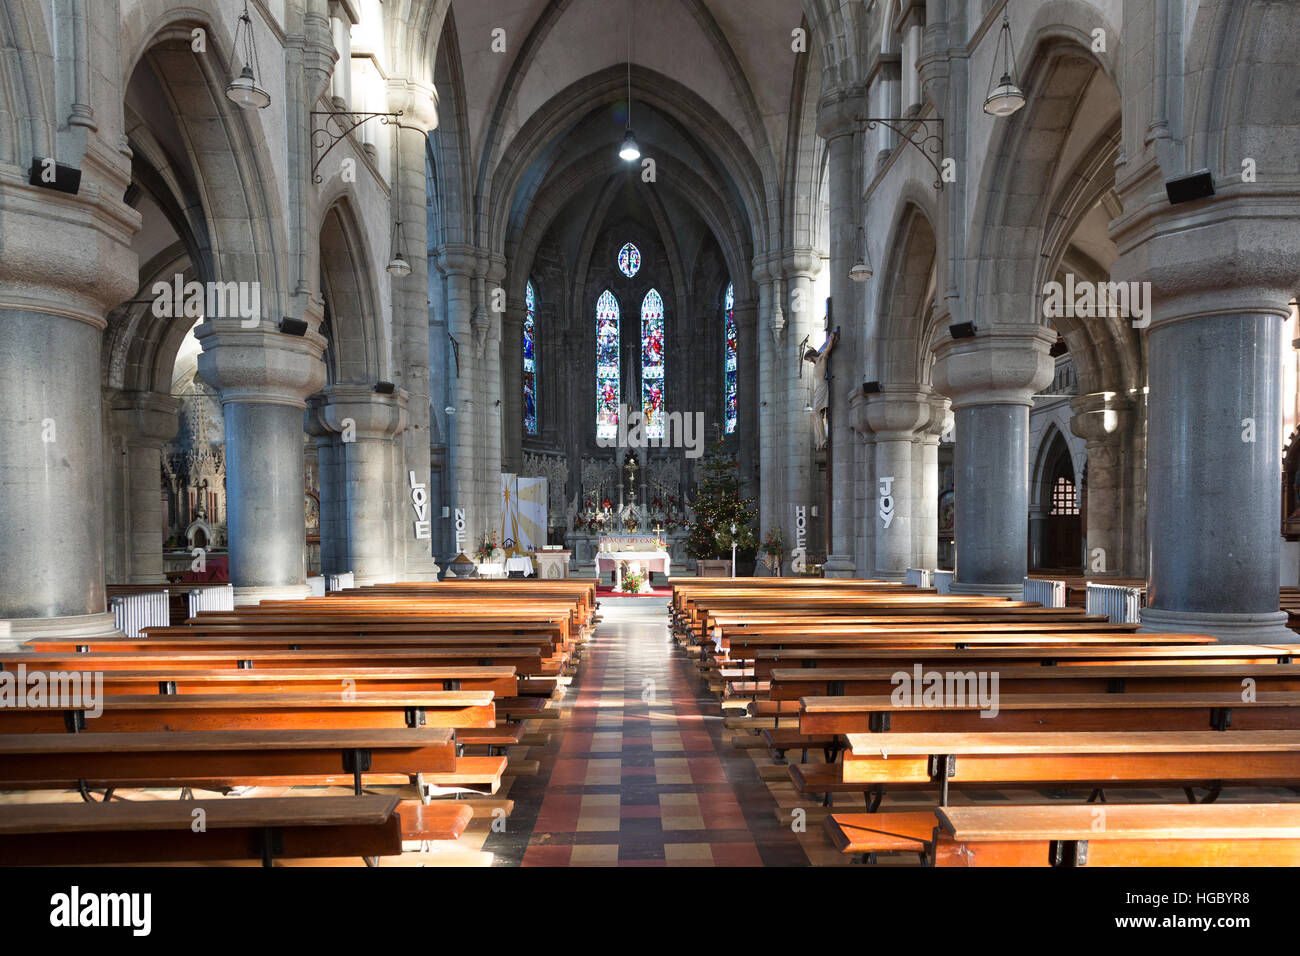 Interior Of Daniel O Connell Memorial Church Of The Holy Cross Cahersiveen County Kerry Ireland Stock Photo Alamy